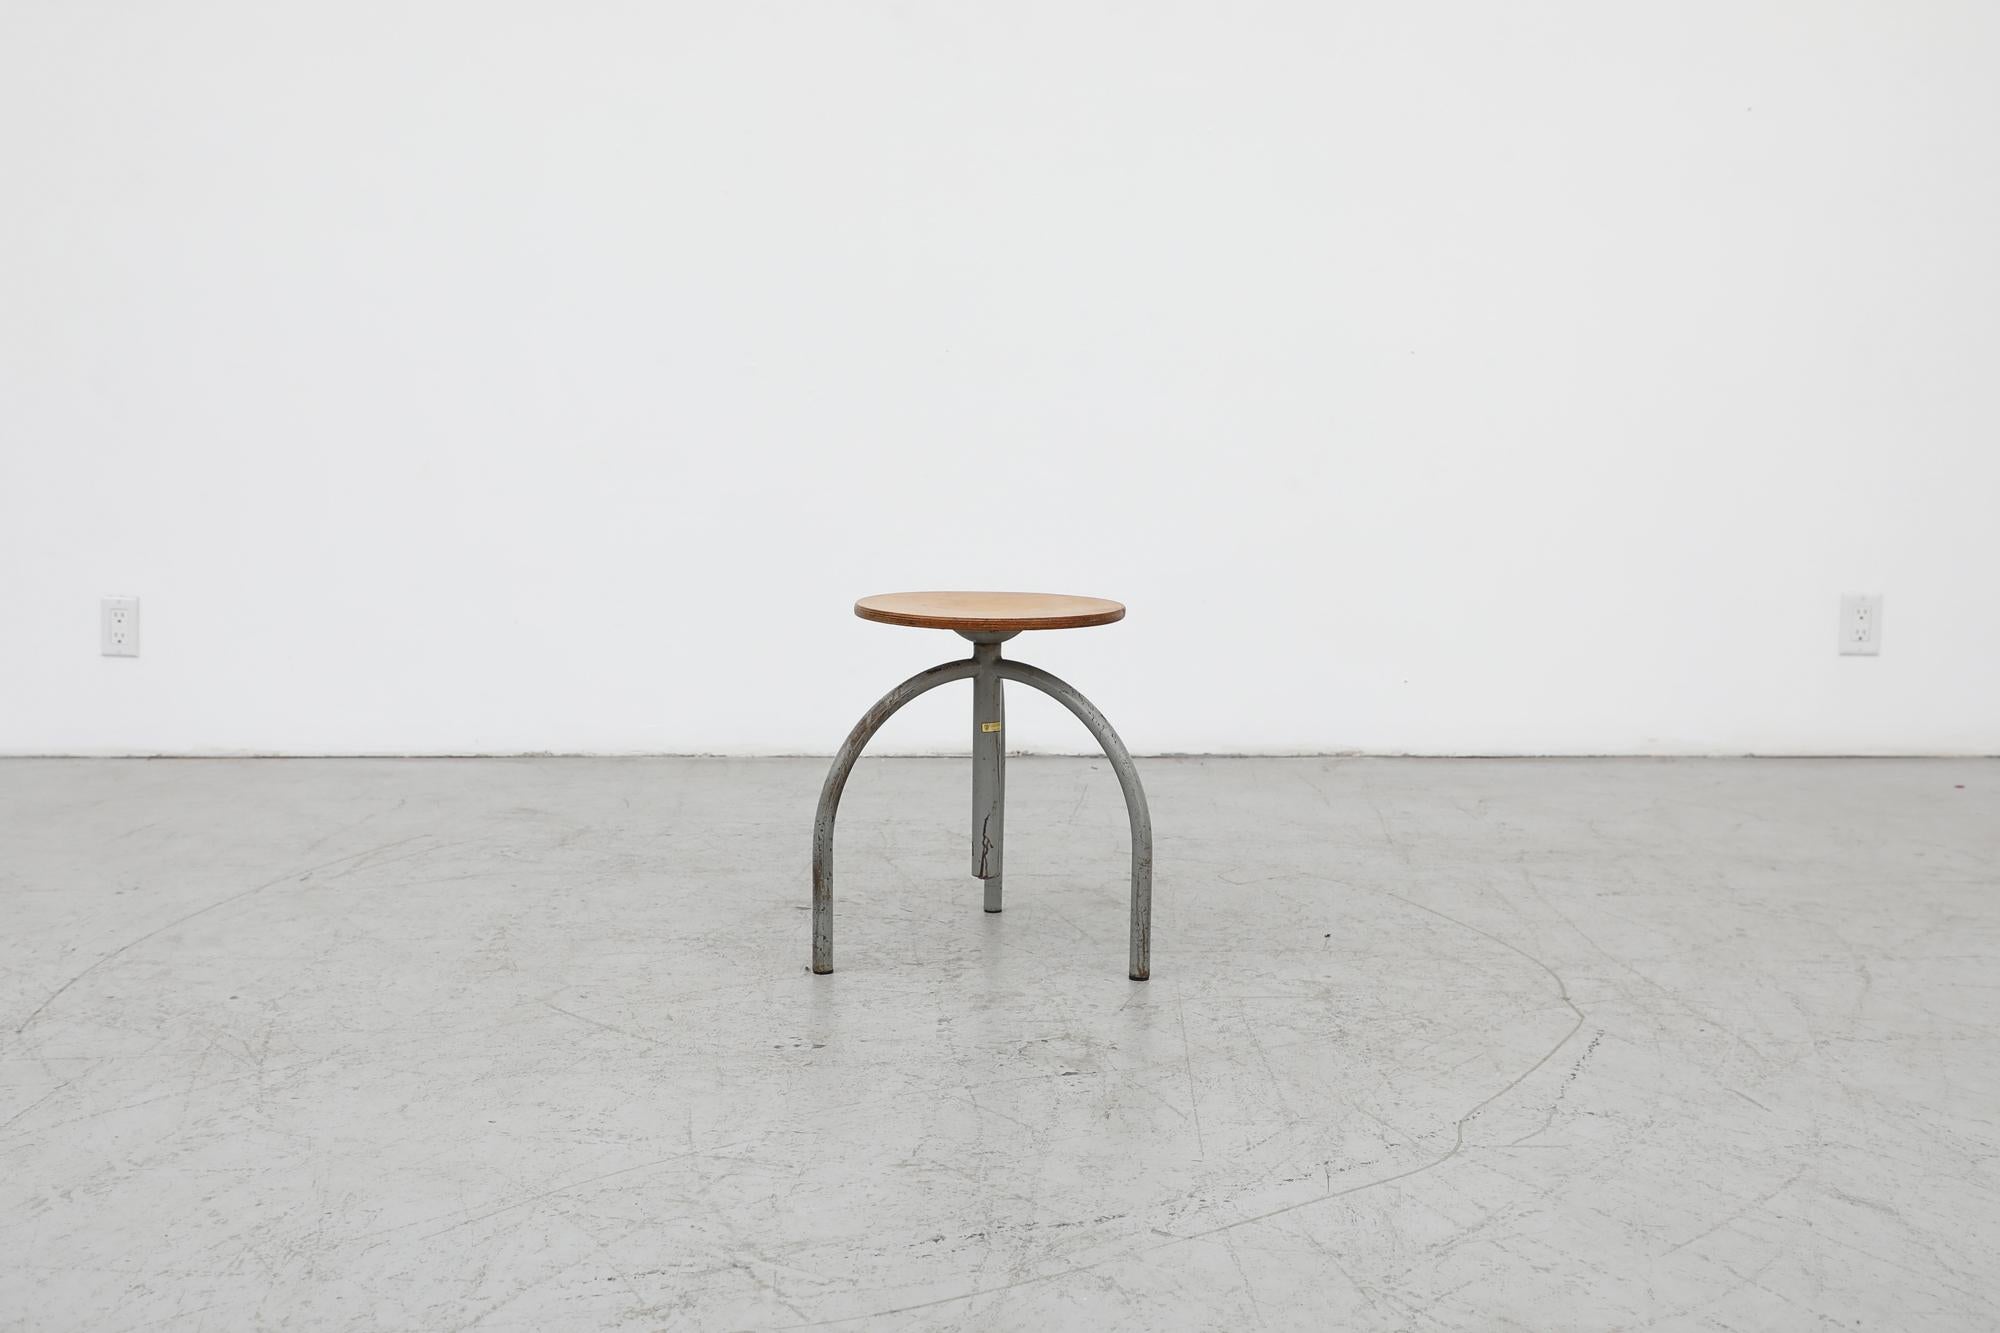 Mid-Century Industrial tripod task stool by Cor Alons for Oosterwolde. The seat is a layered and formed birch plywood on a threaded stem for height adjustment. The frame is made of fat hollow enameled metal tubing. In original condition with visible